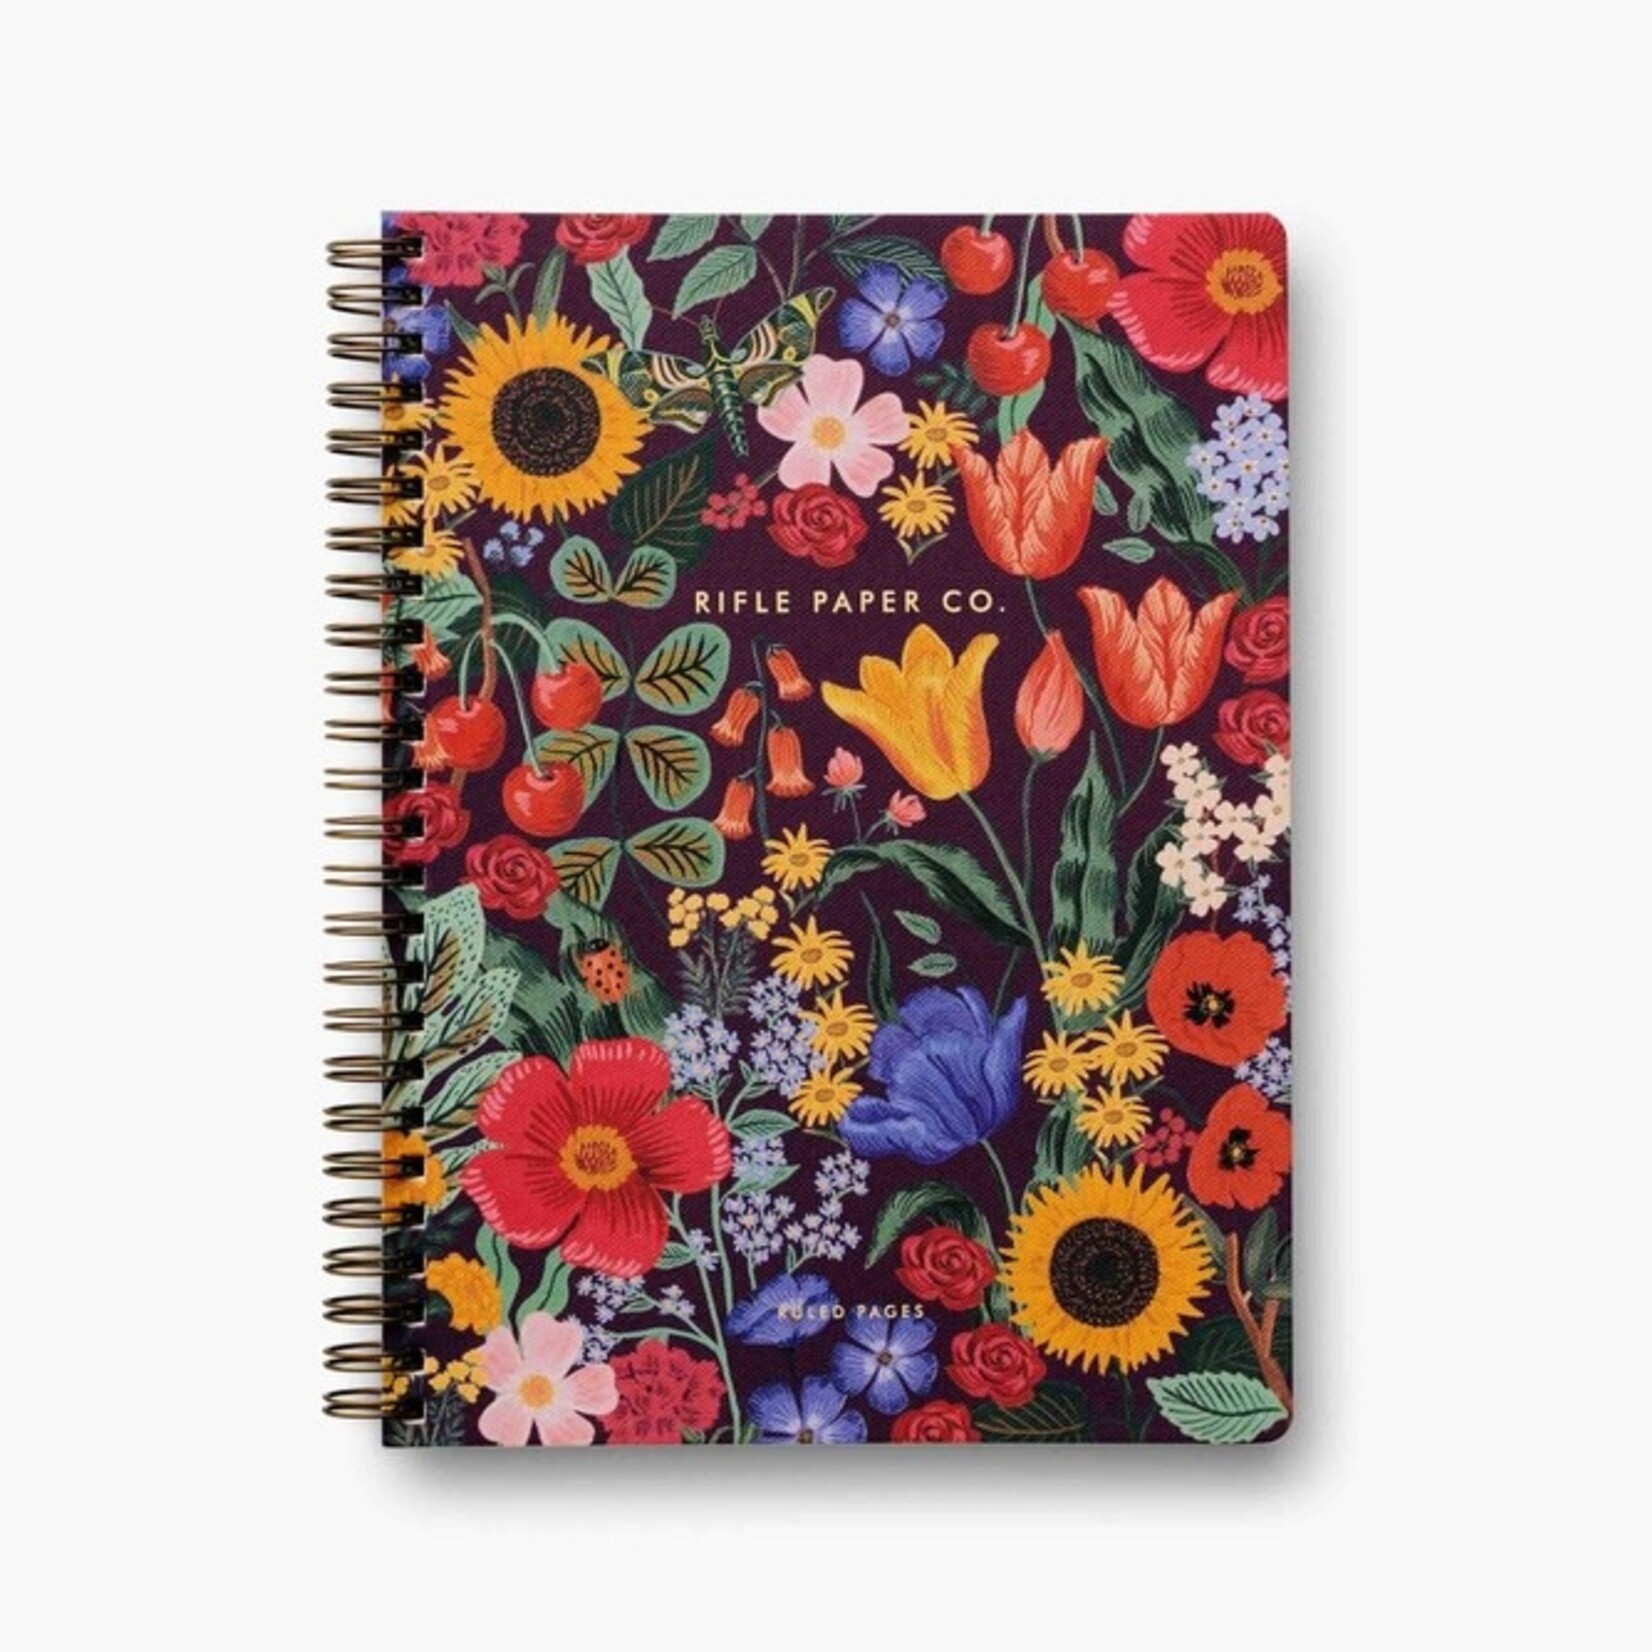 Rifle Paper Co Spiral Notebook